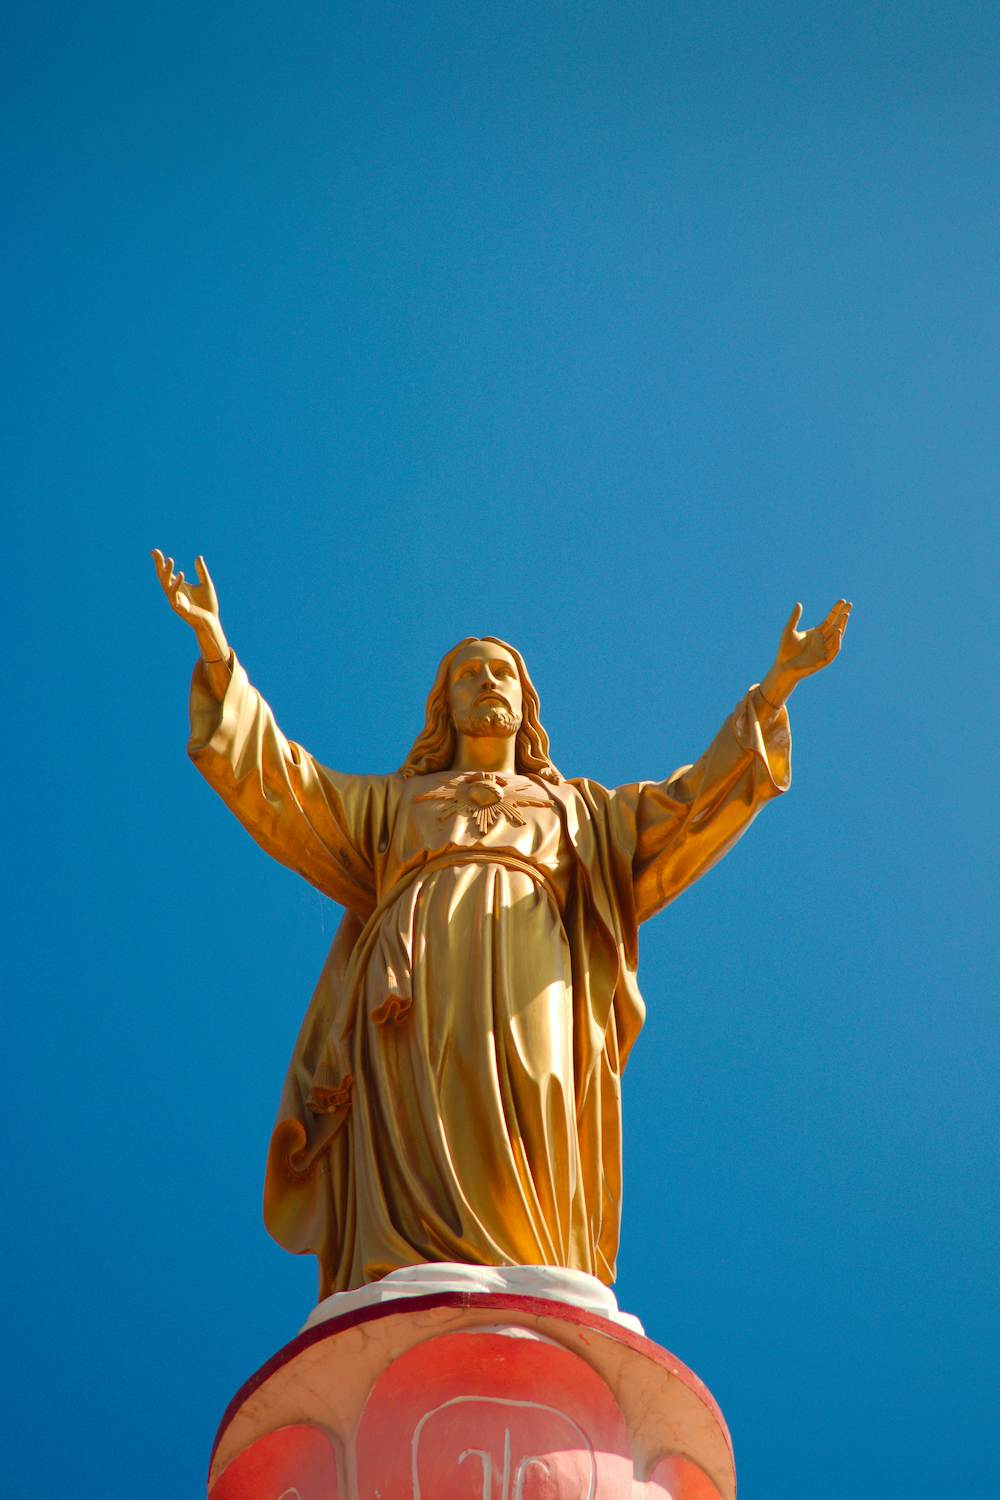 A statue of Jesus with his hands outstretched.